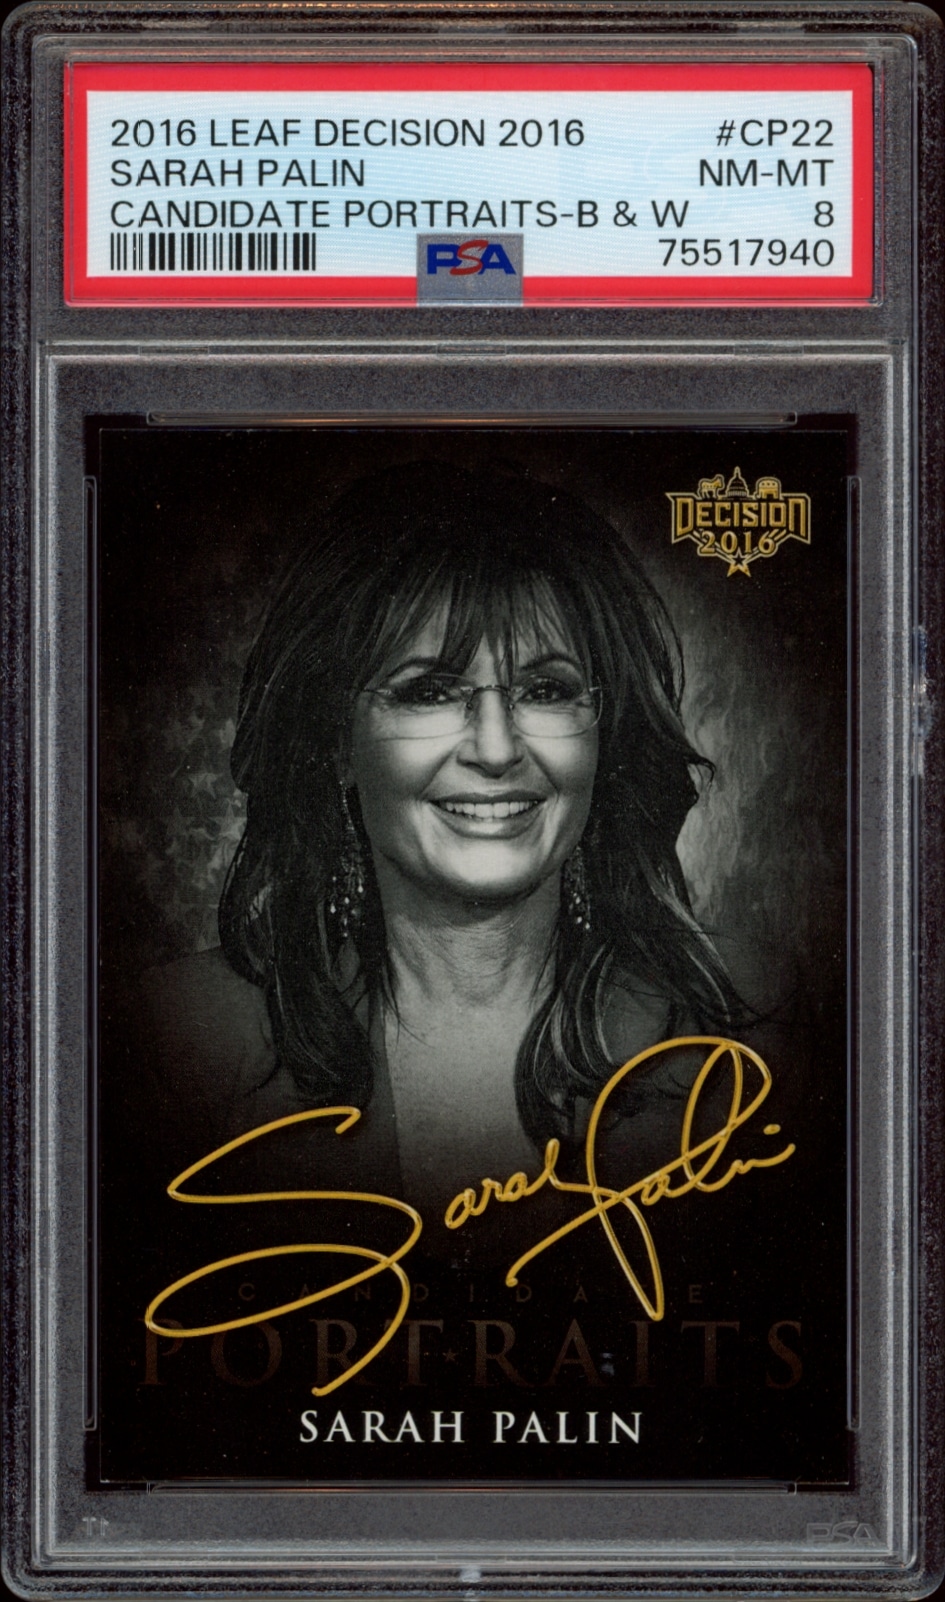 Signed 2016 Leaf Decision collectible card featuring portrait of Sarah Palin, PSA rated NM - MT 8.